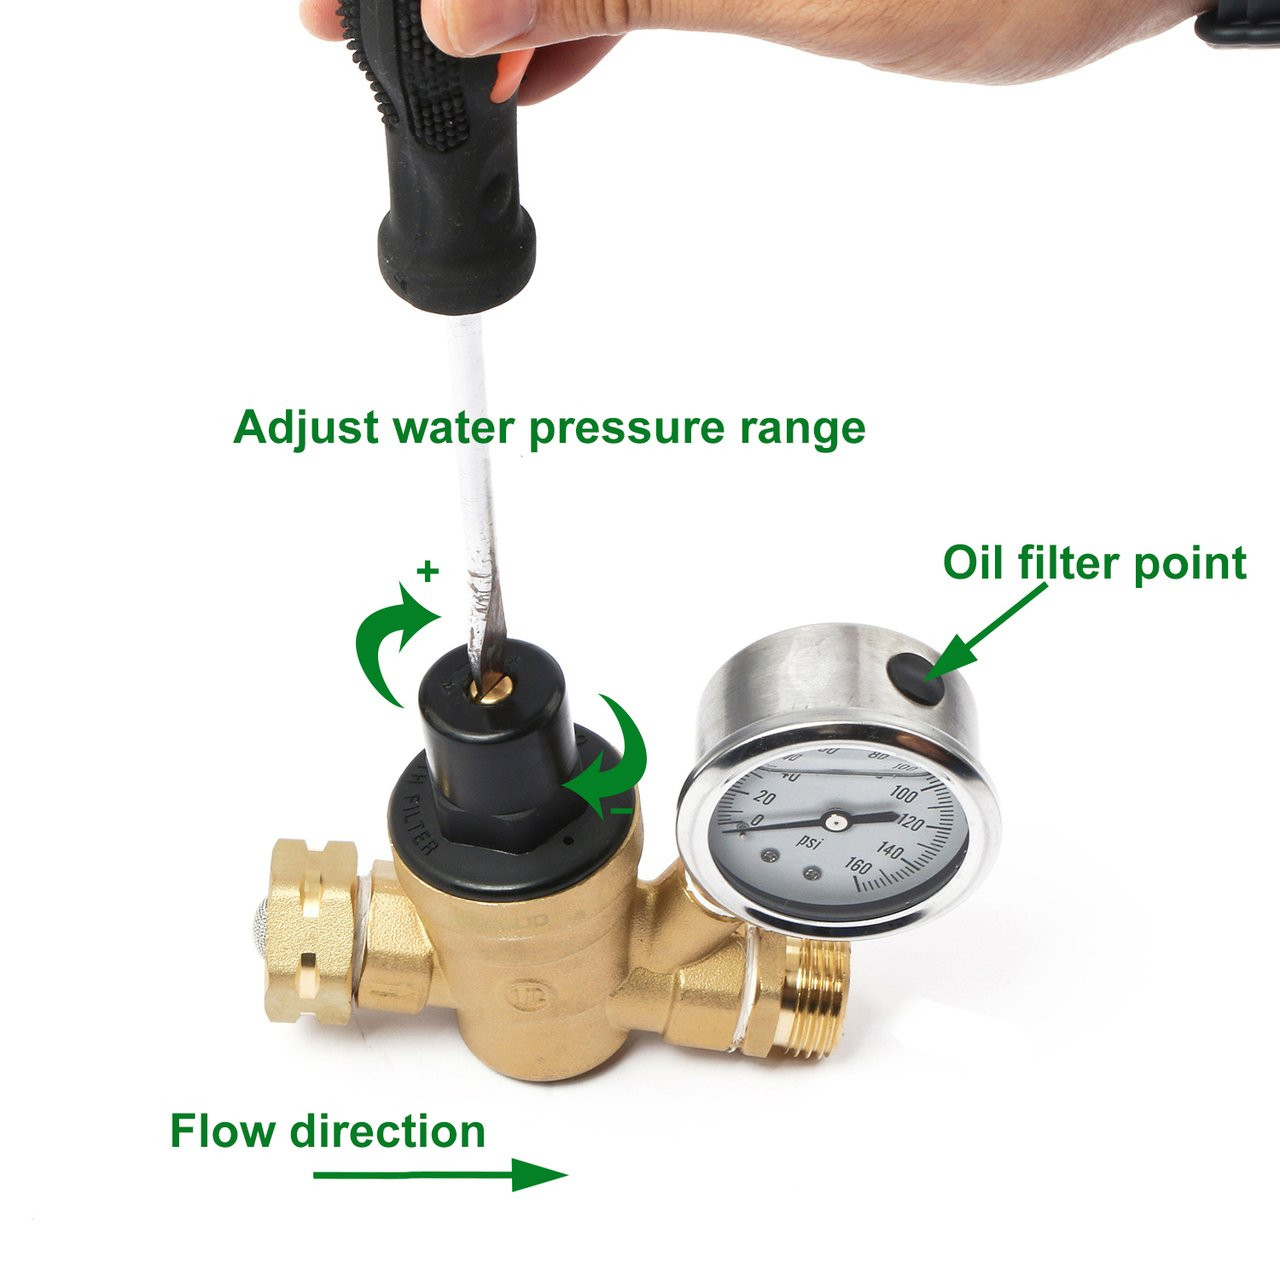 How to Install a Water Pressure Regulator - Supersize Life